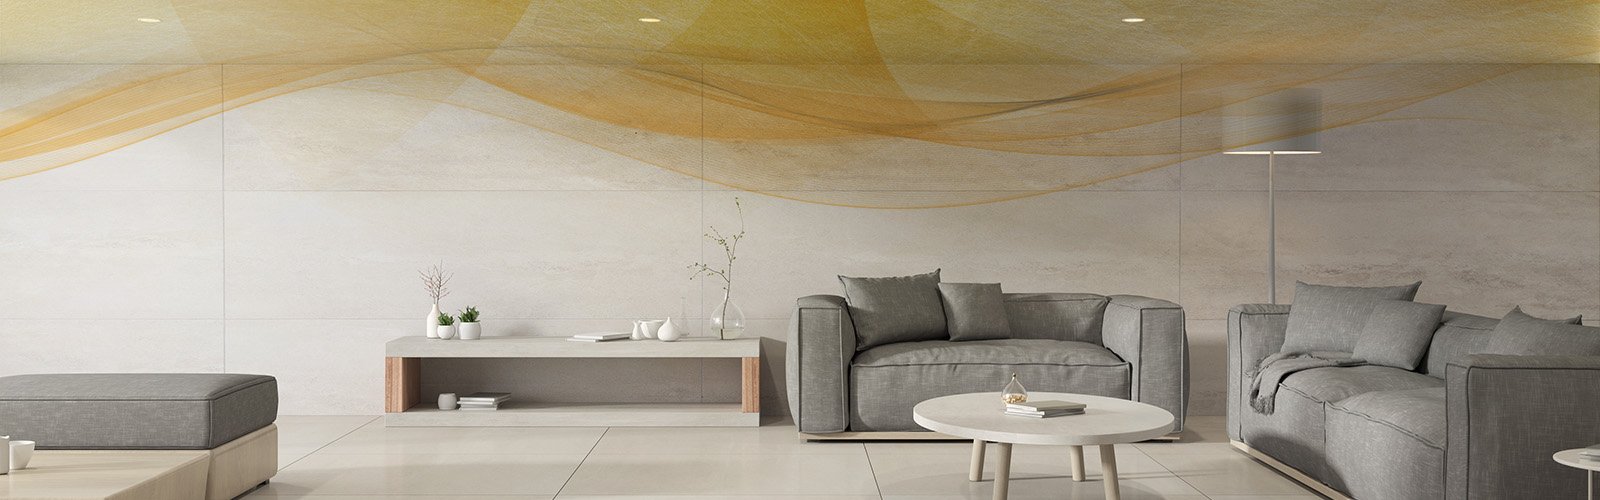 Stretch ceiling heating: aesthetic room design meets innovative heat source